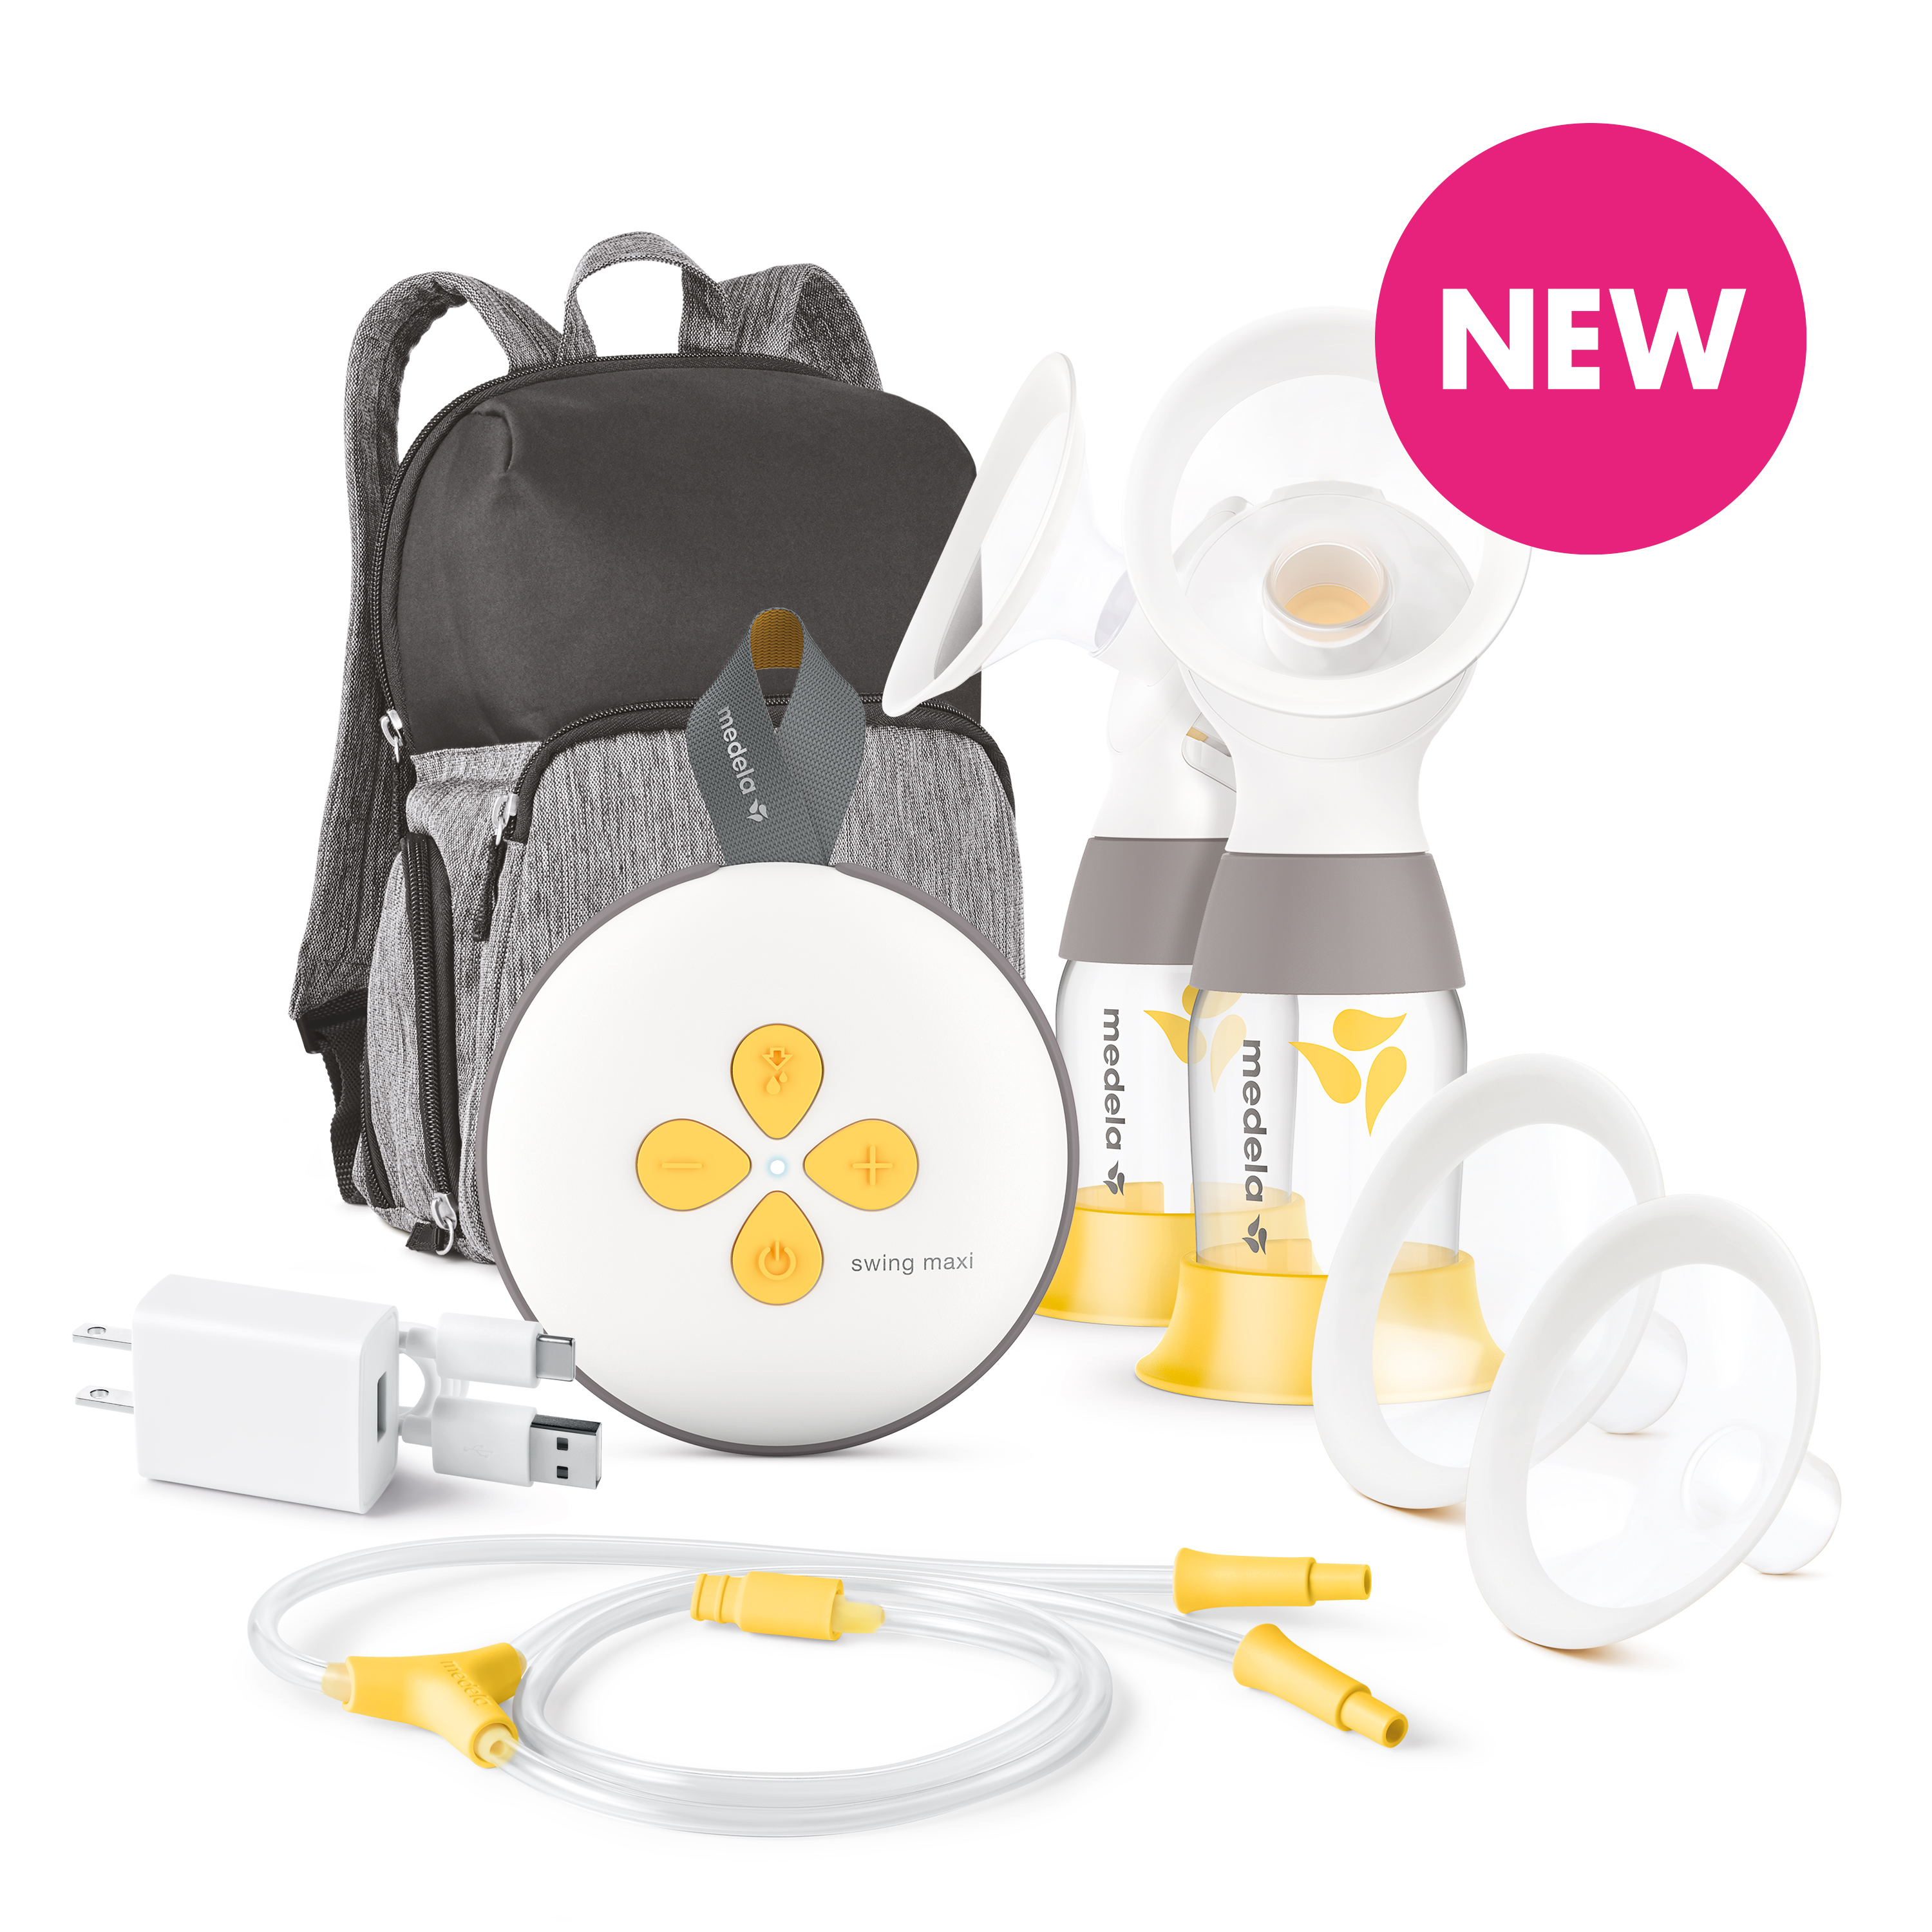 New Portable Breast Pump from Medela Offers More Milk* and